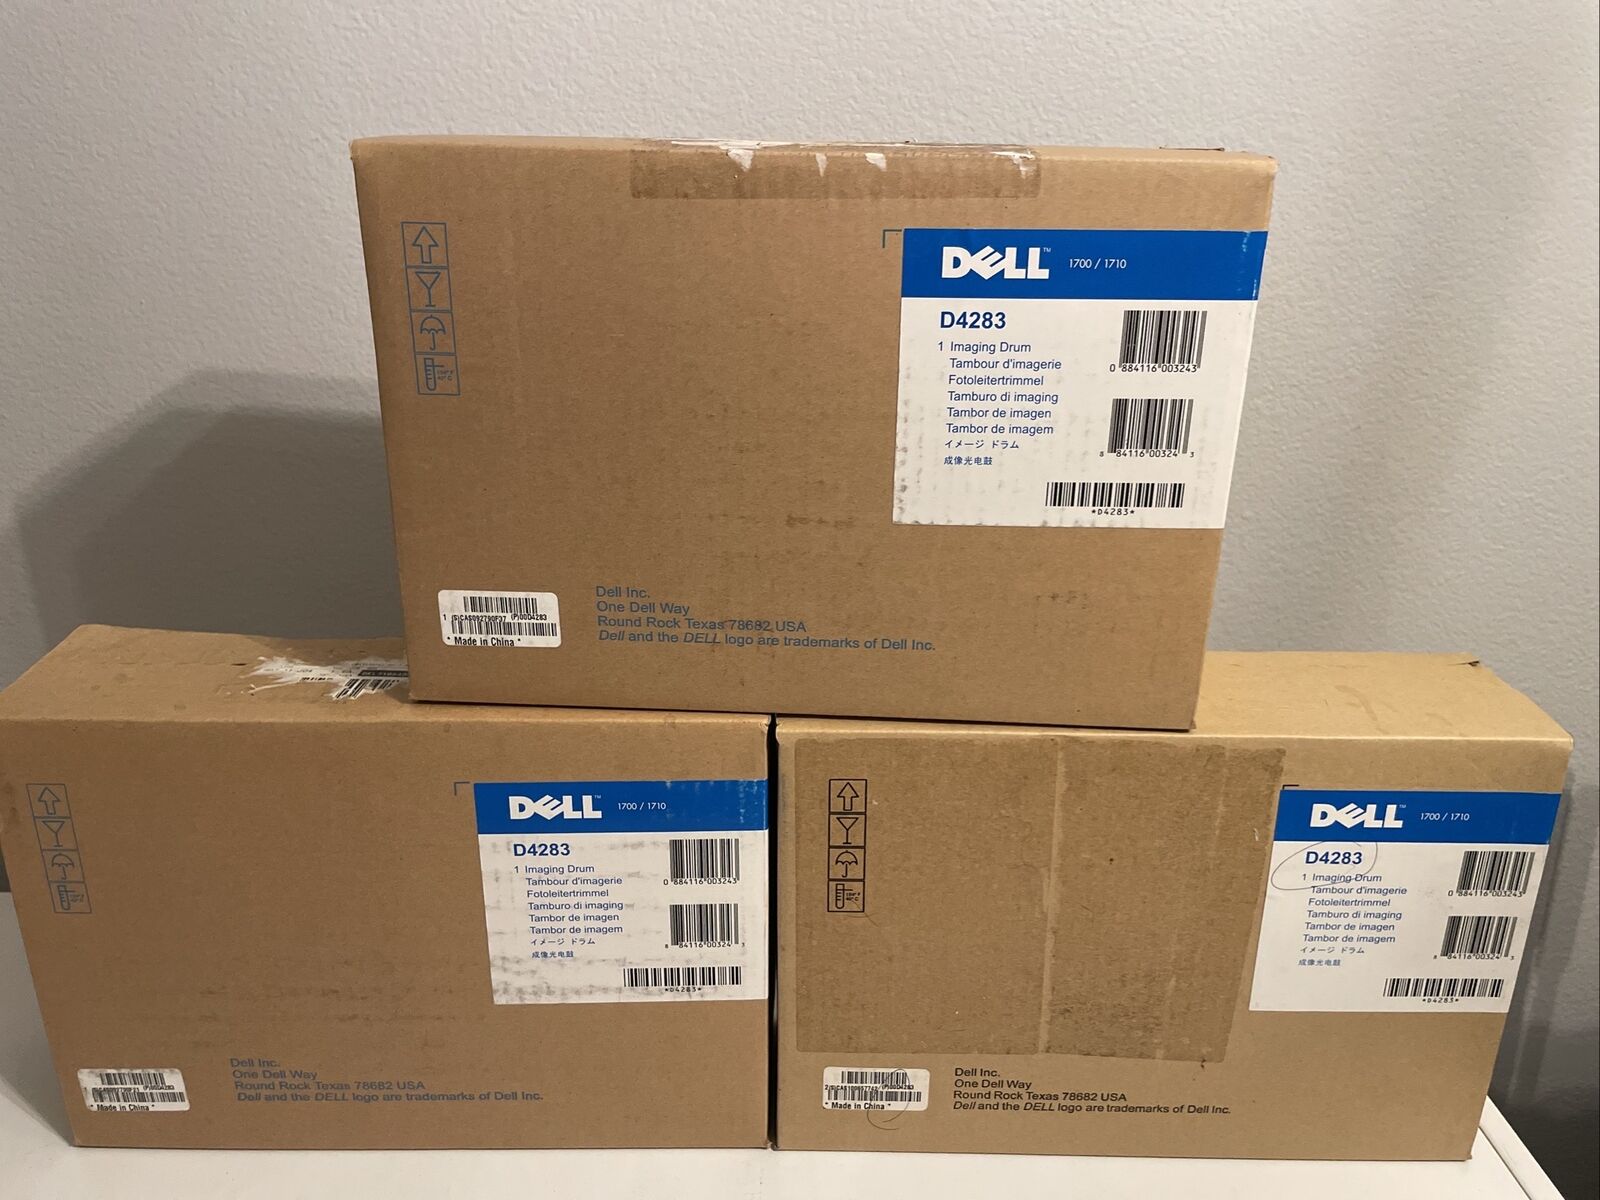 3 New/Sealed Dell 1700/1710 D4283 Imaging Drum